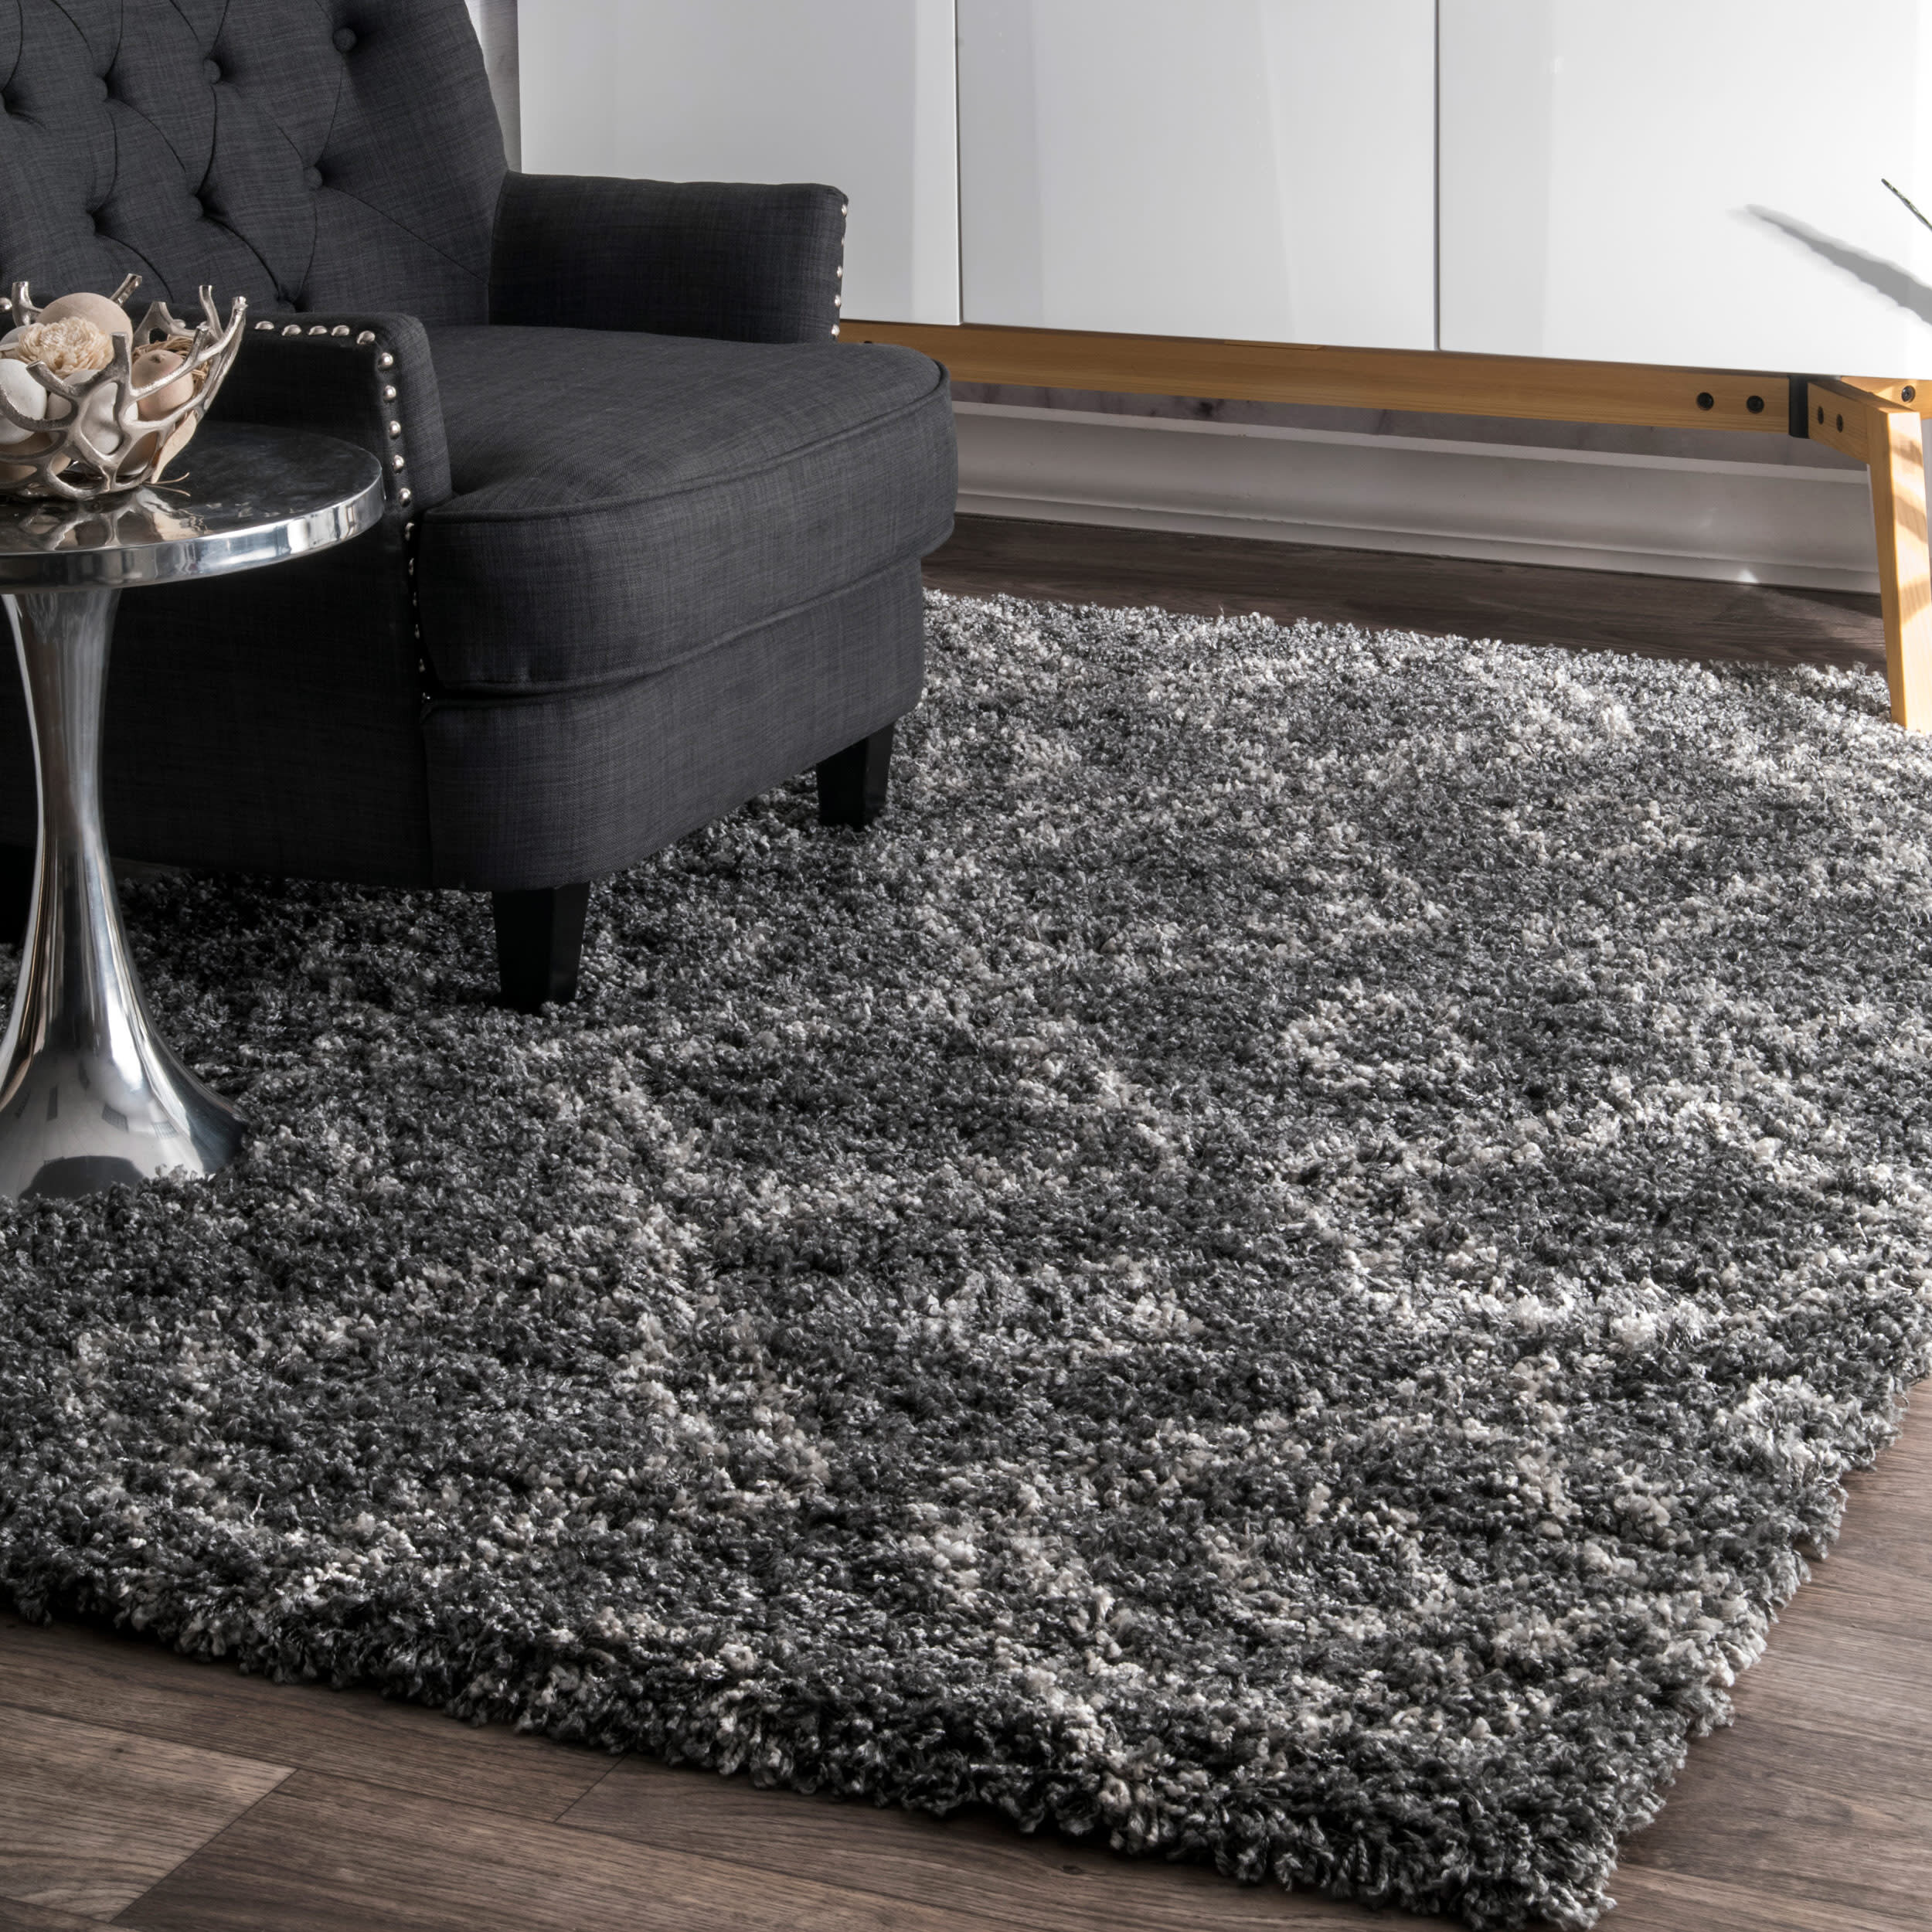 Plain Grey Rug Glitter Silver Living Room THICK Carpet Small Extra Large Quality 